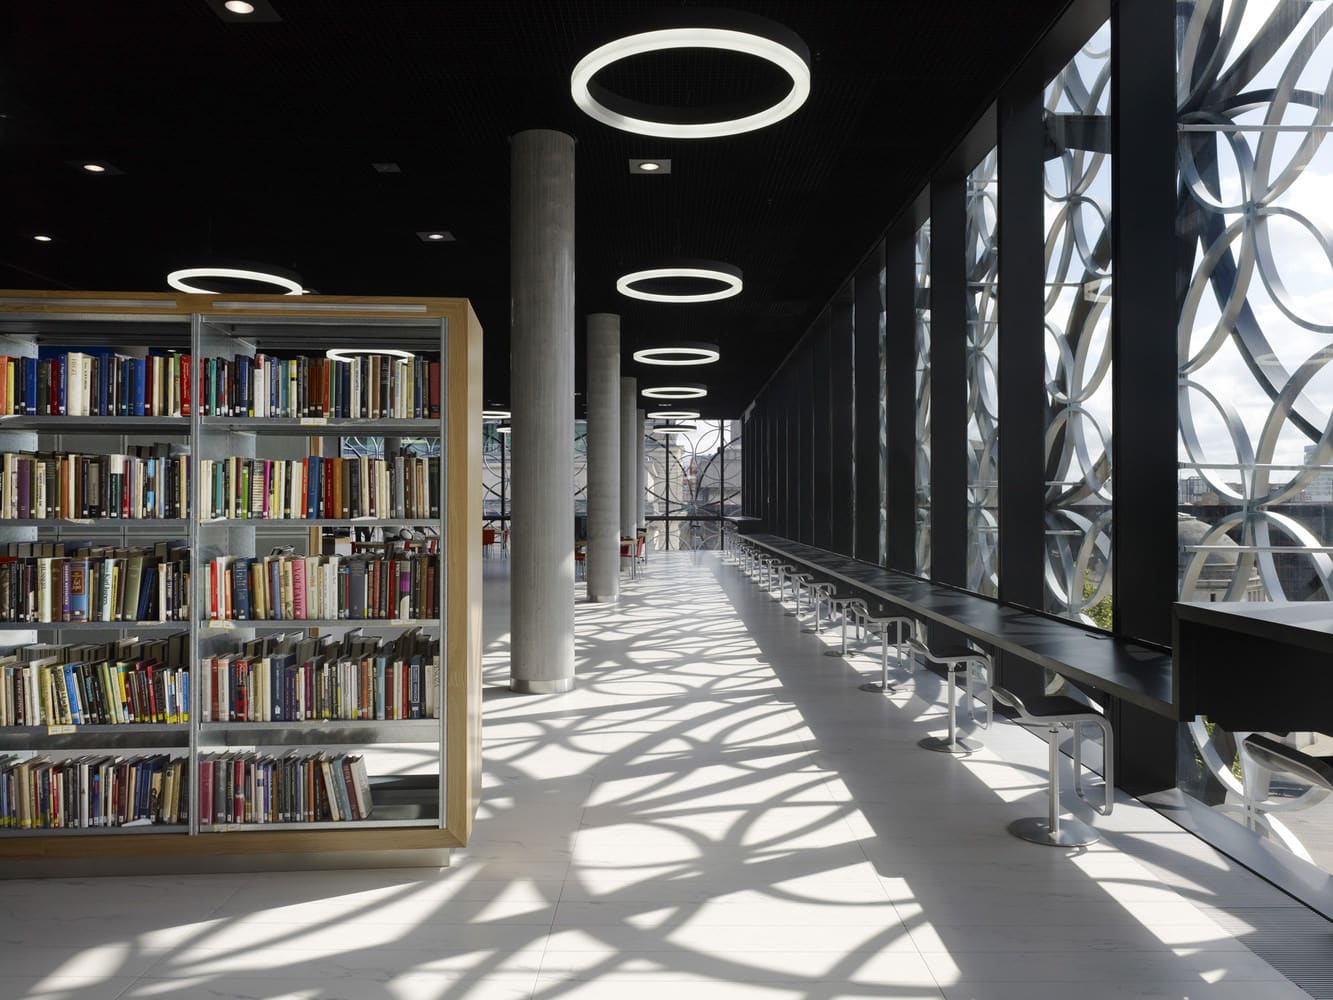 Library of Birmingham by Mecanoo, Photo by Christian Richters